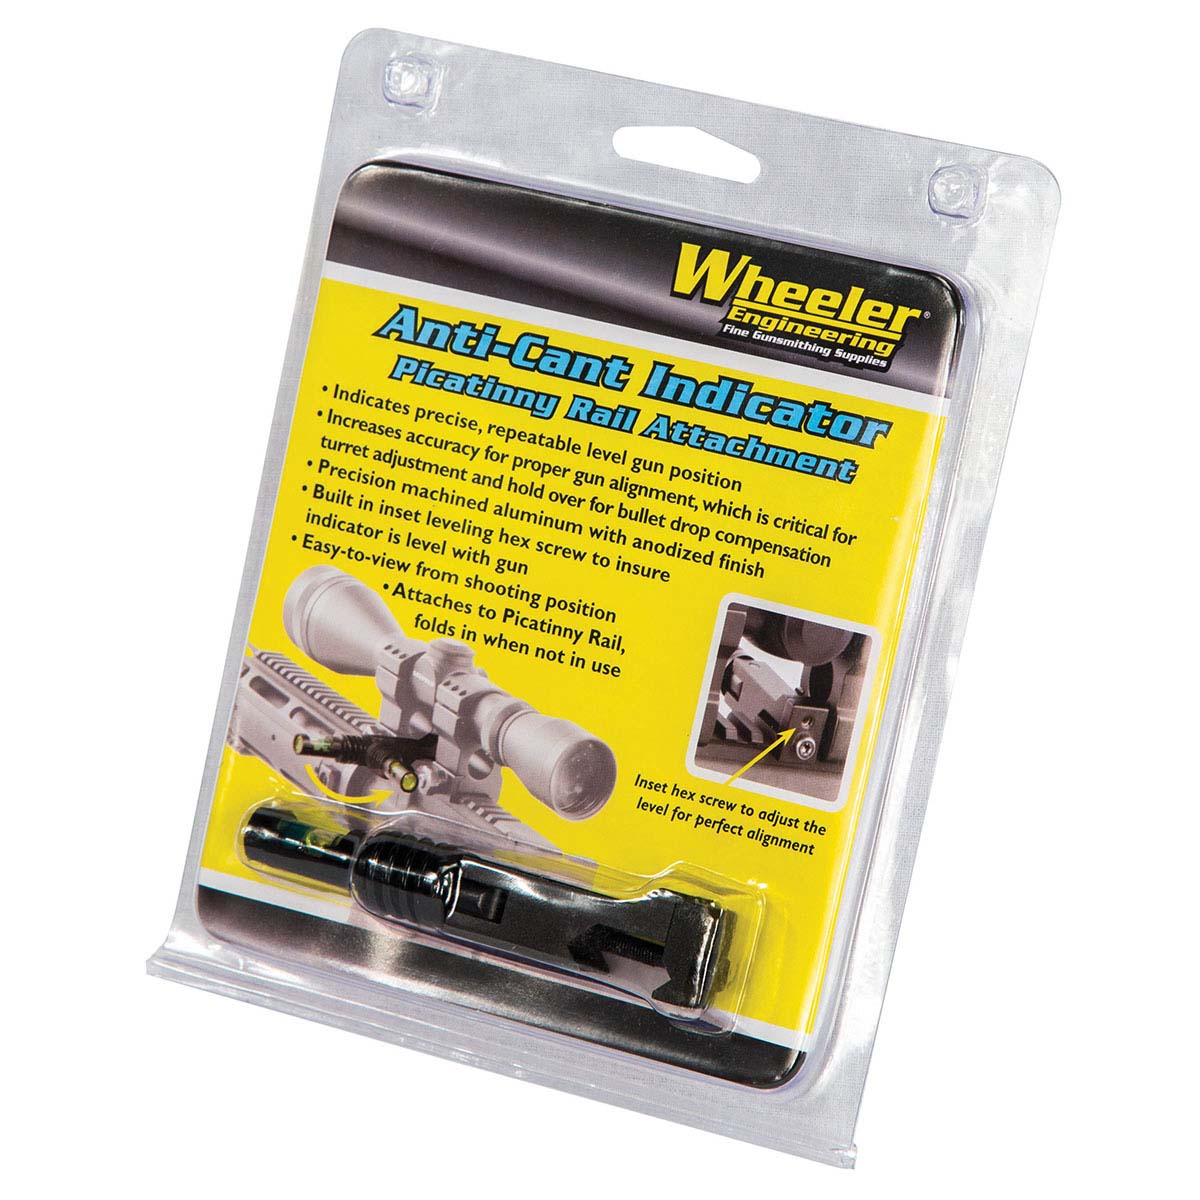 WHEELER Anti Cant Indicator Pic Rail Attachment 580033 for sale online 